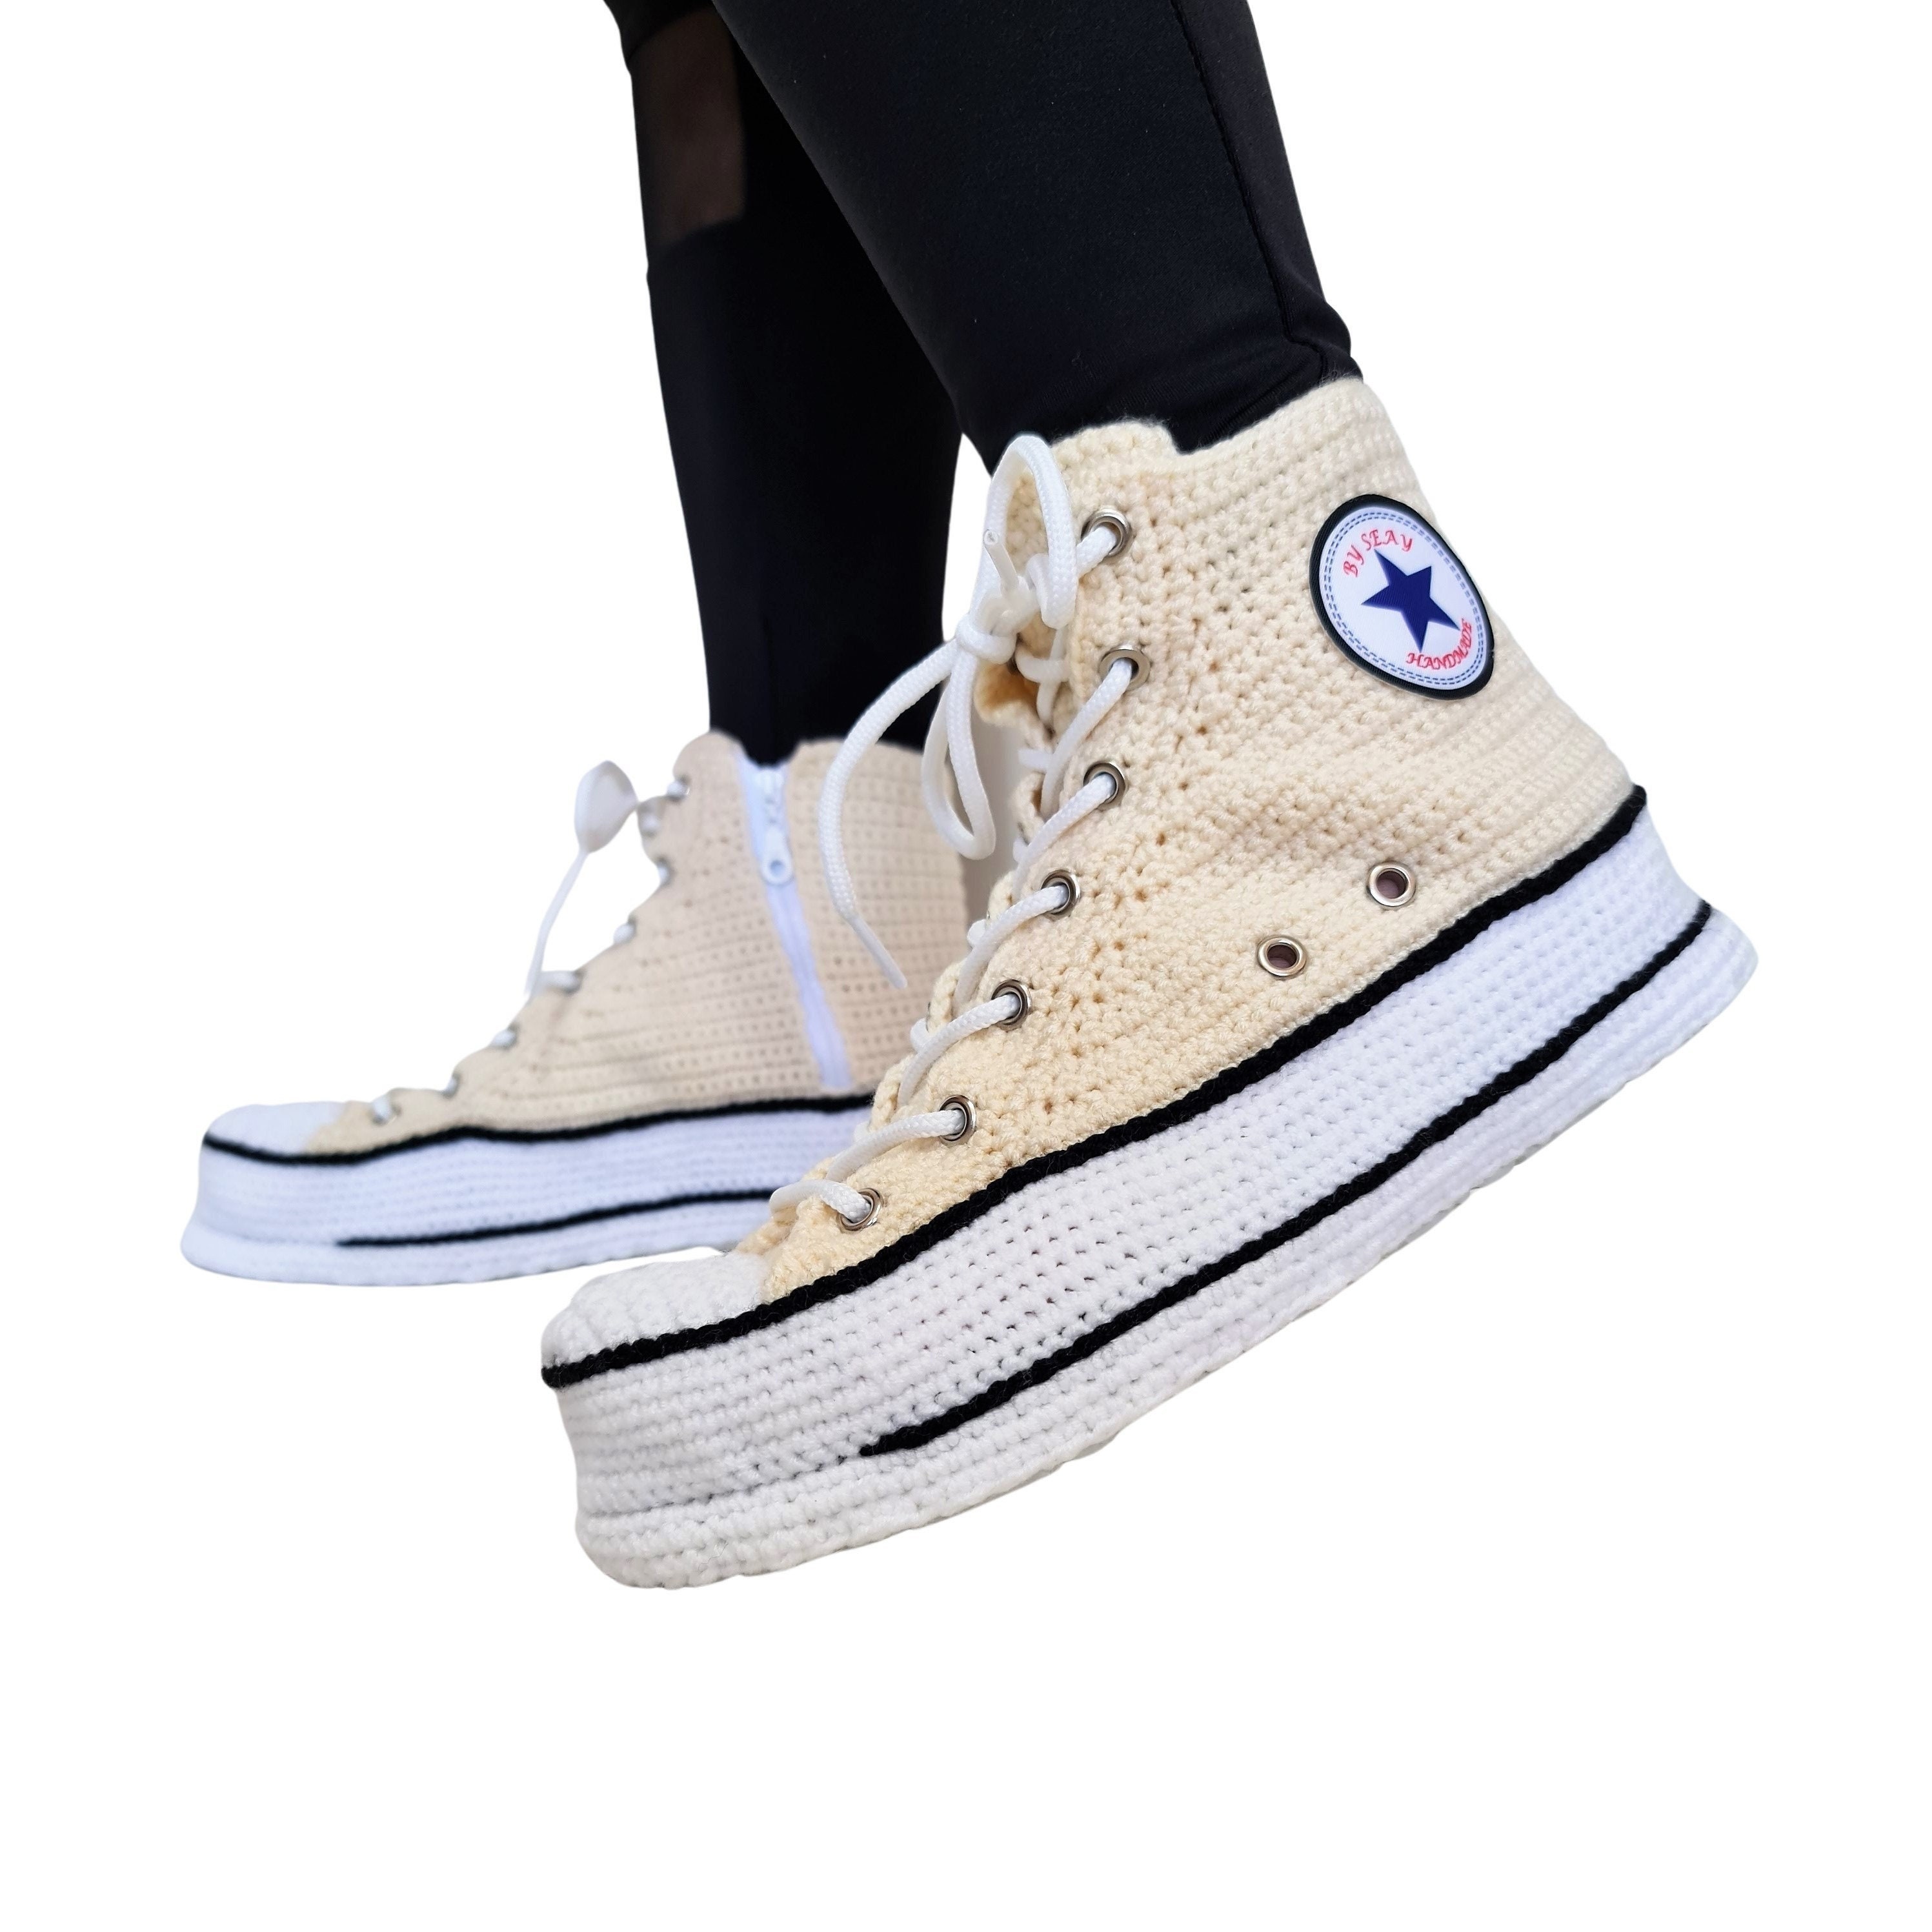 Off White Converse High Tops Sneakers Plush Slippers -